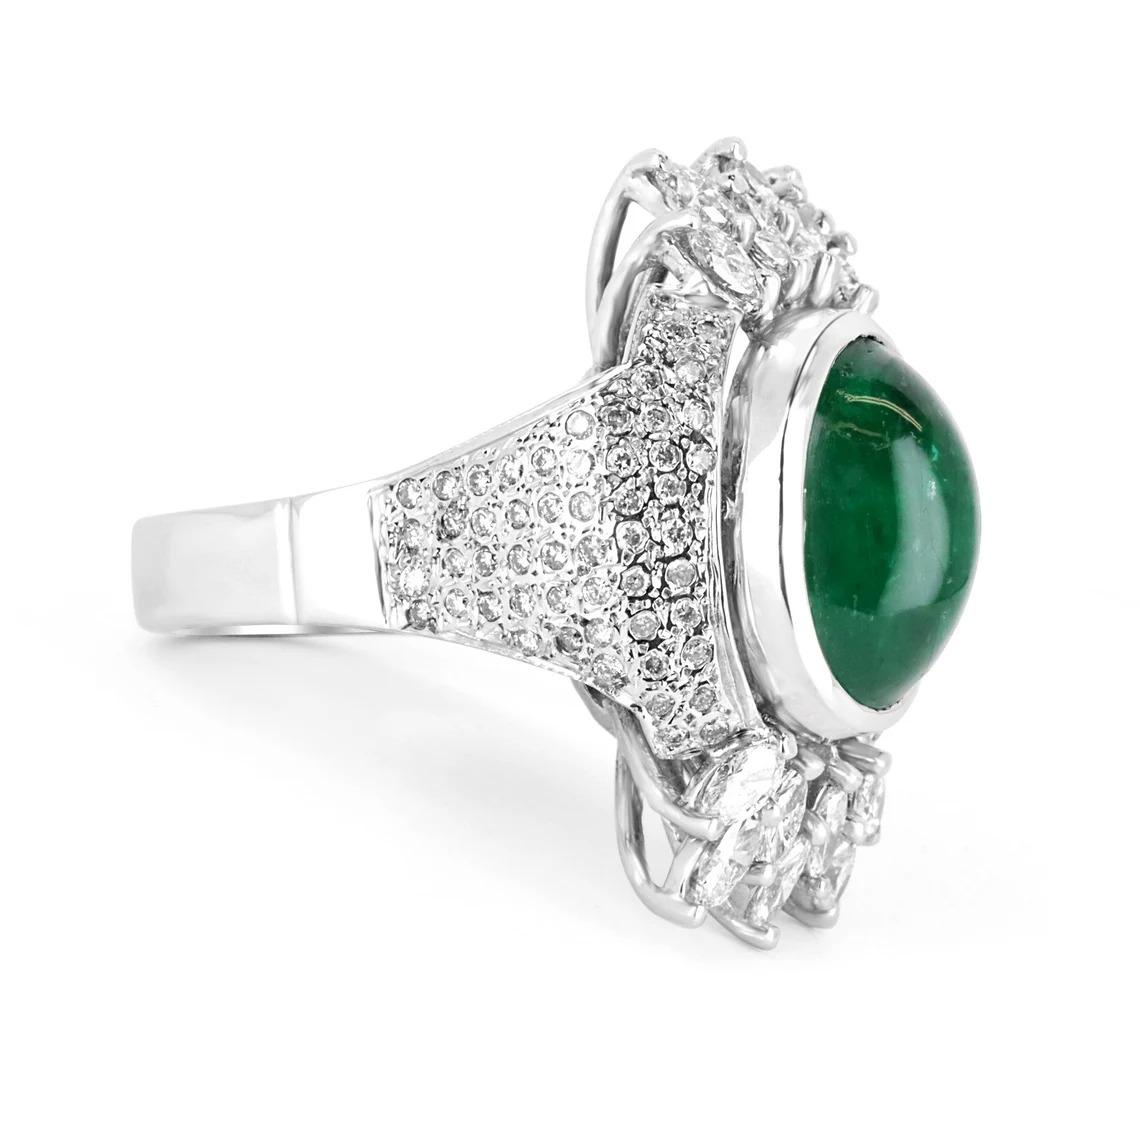 As regal as can be, this estate emerald and diamond cocktail ring is inspired by the Victorian period. It is quite a luxurious work of art and a true showstopper. A natural Colombian emerald cabochon is the center of attention and displays beautiful